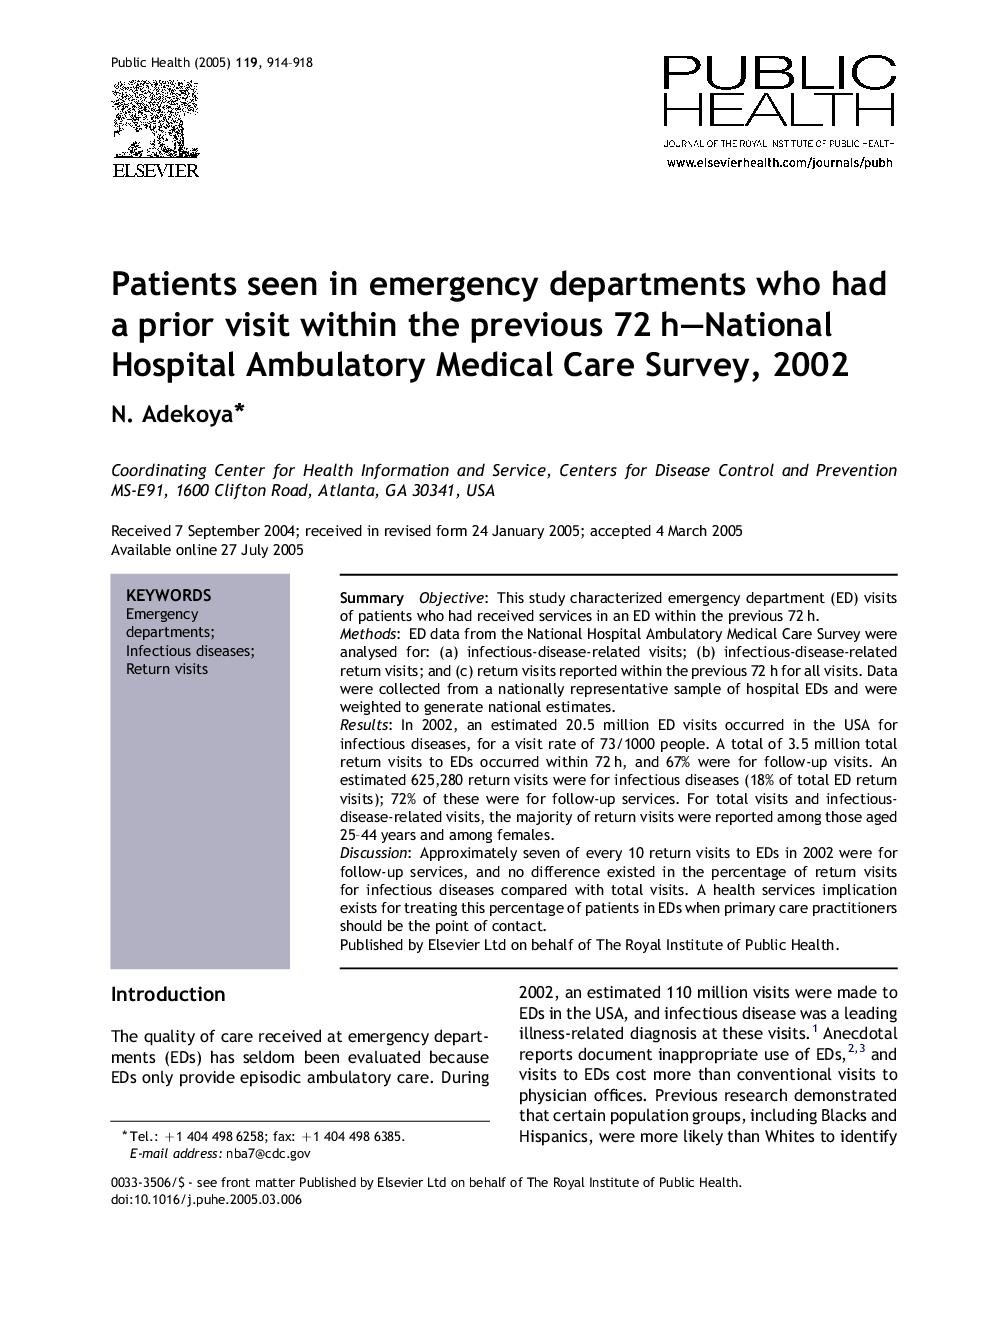 Patients seen in emergency departments who had a prior visit within the previous 72Â h-National Hospital Ambulatory Medical Care Survey, 2002